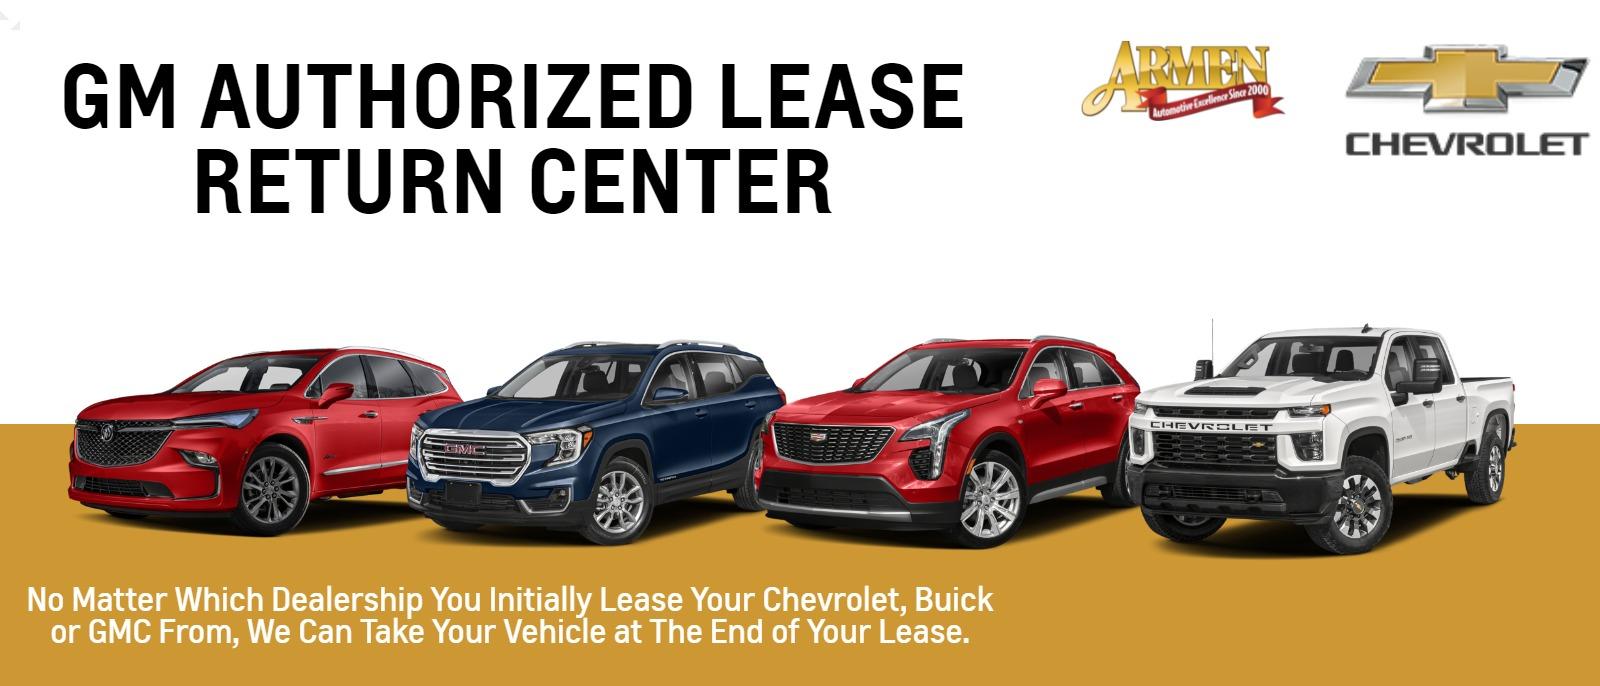 GM Authorized Lease Return Center No Matter Which Dealership You Initially Lease Your Chevrolet, Buick or GMC From, We Can Take Your Vehicle at The End of Your Lease.